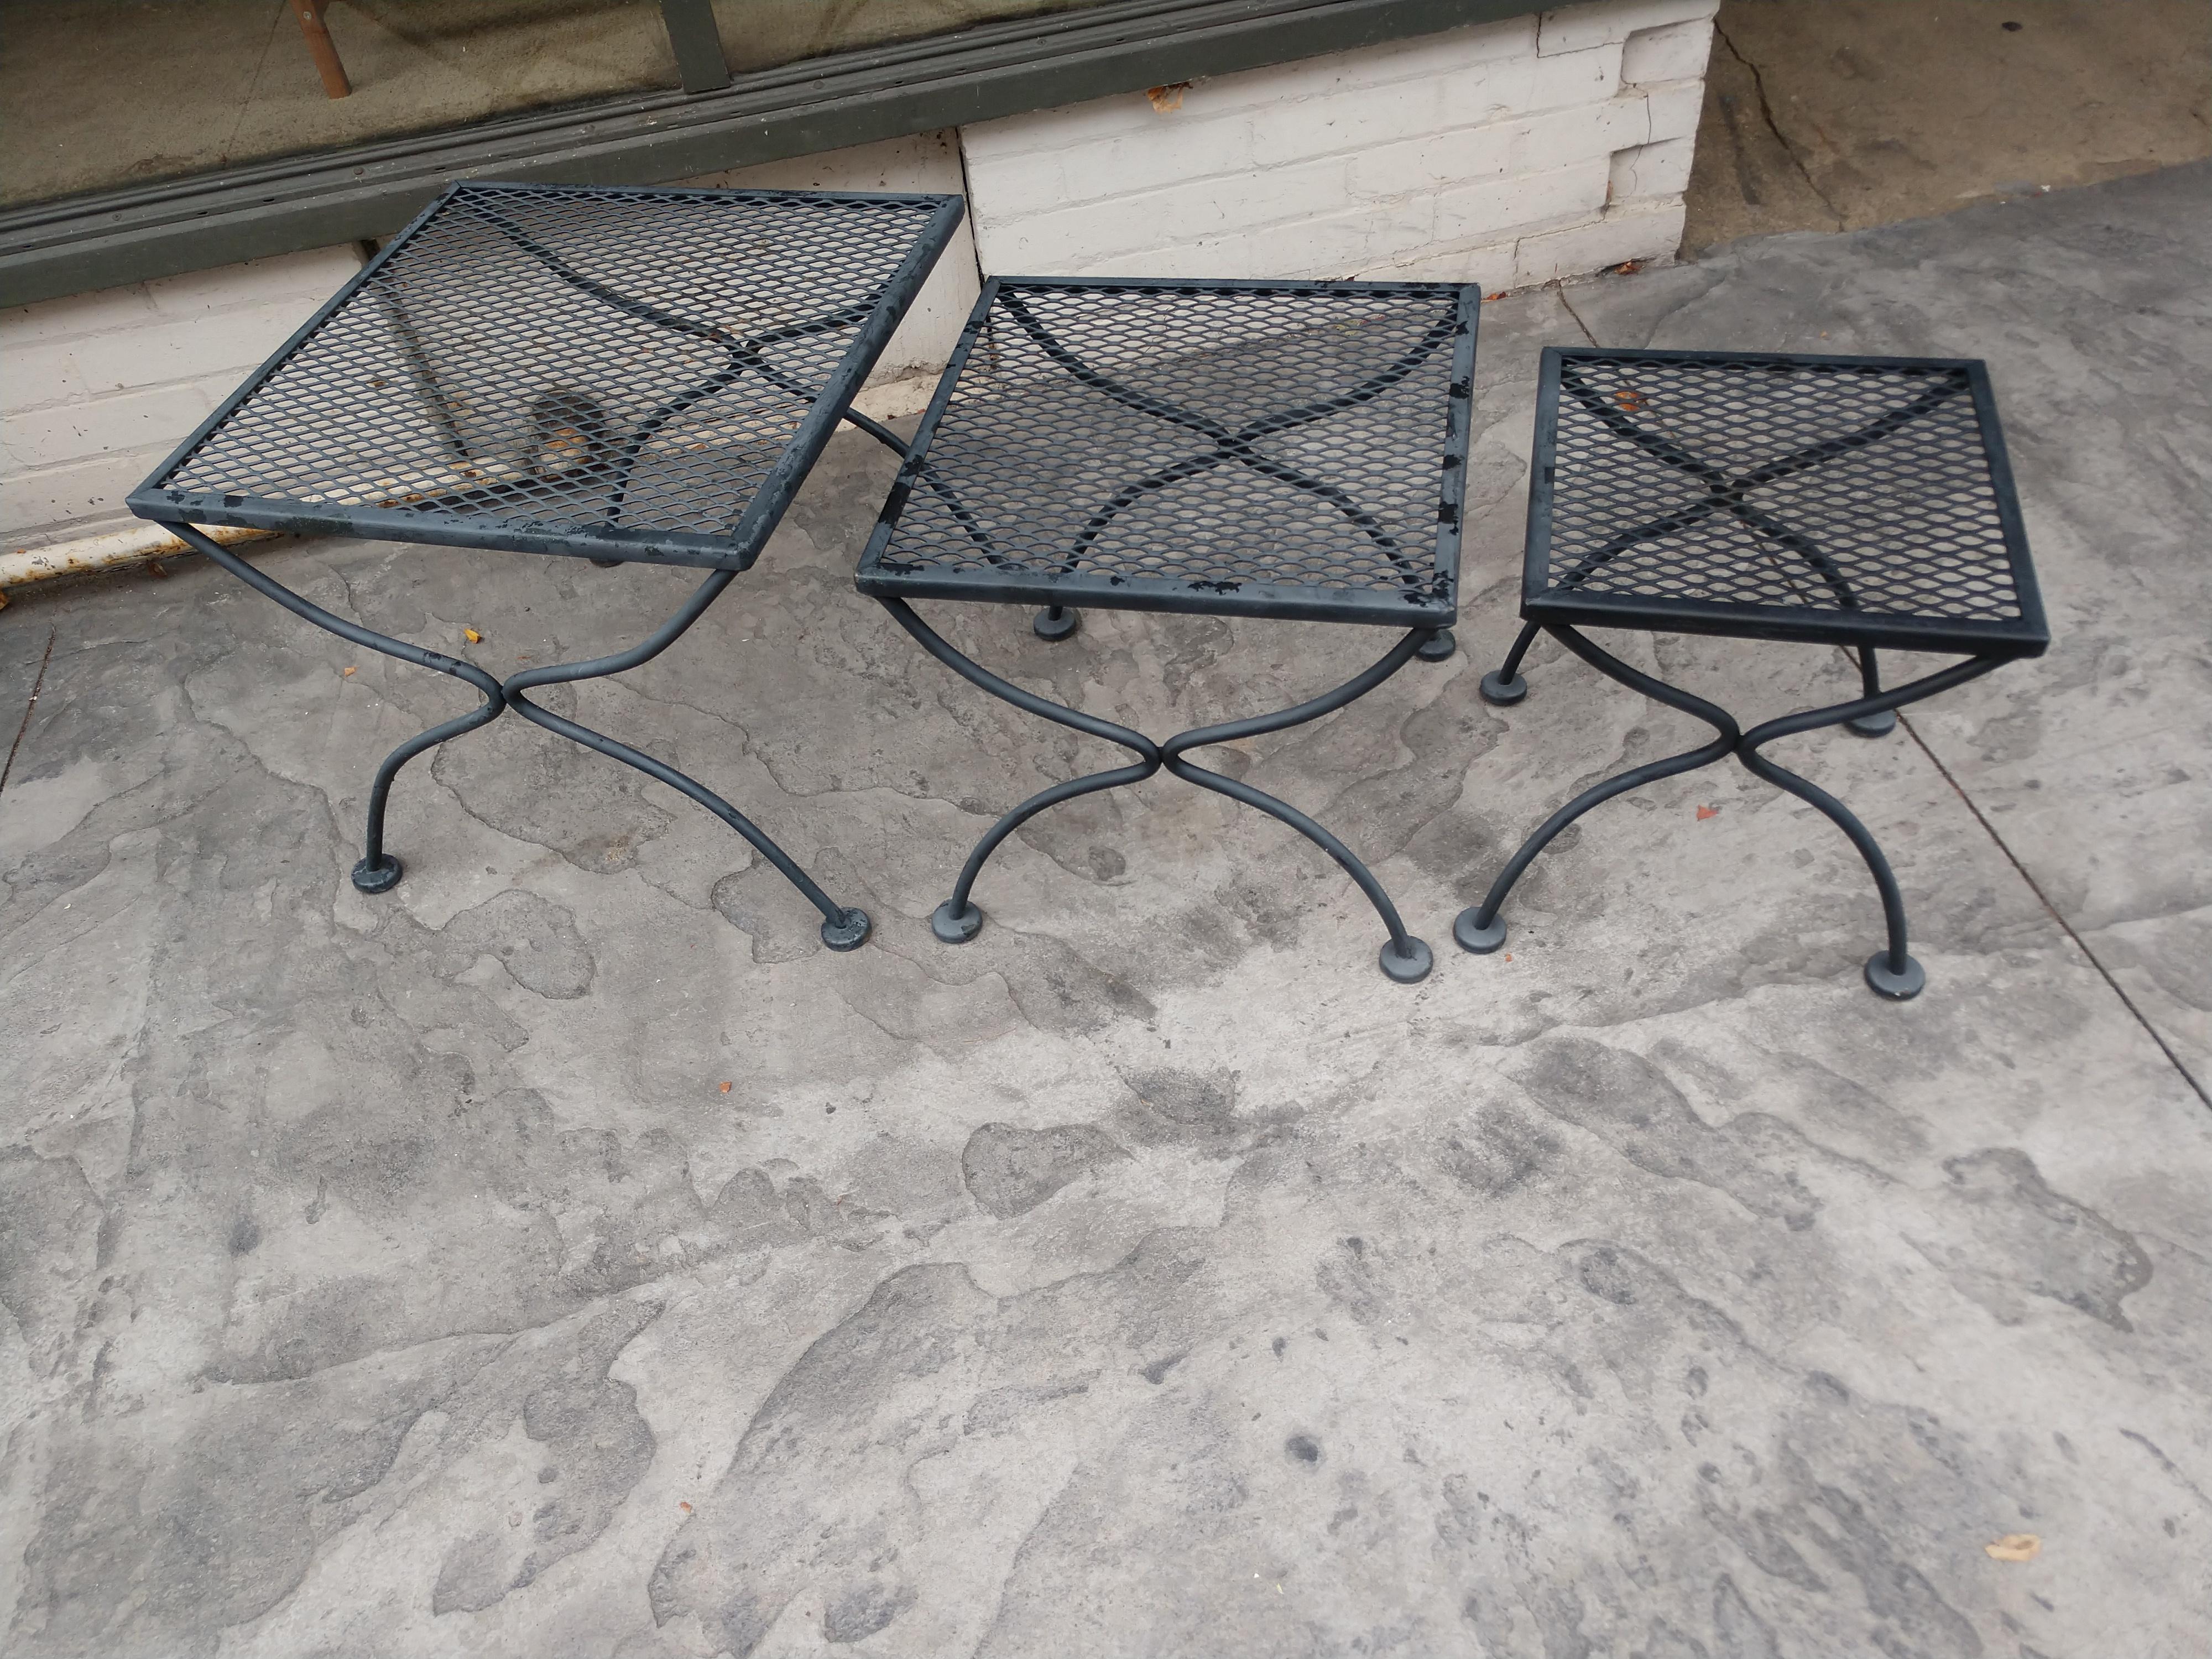 Set of 3 nesting, stacking tables in iron mesh. Sizes are 19.5 x 19.5 x 16.5, 16 x 16 x 15 H, and 12.5 x 12.5 x 14.5 H
Painted black, but easily changed to meet your decorating taste.
Set of 6 radar chairs in a different listing along with a